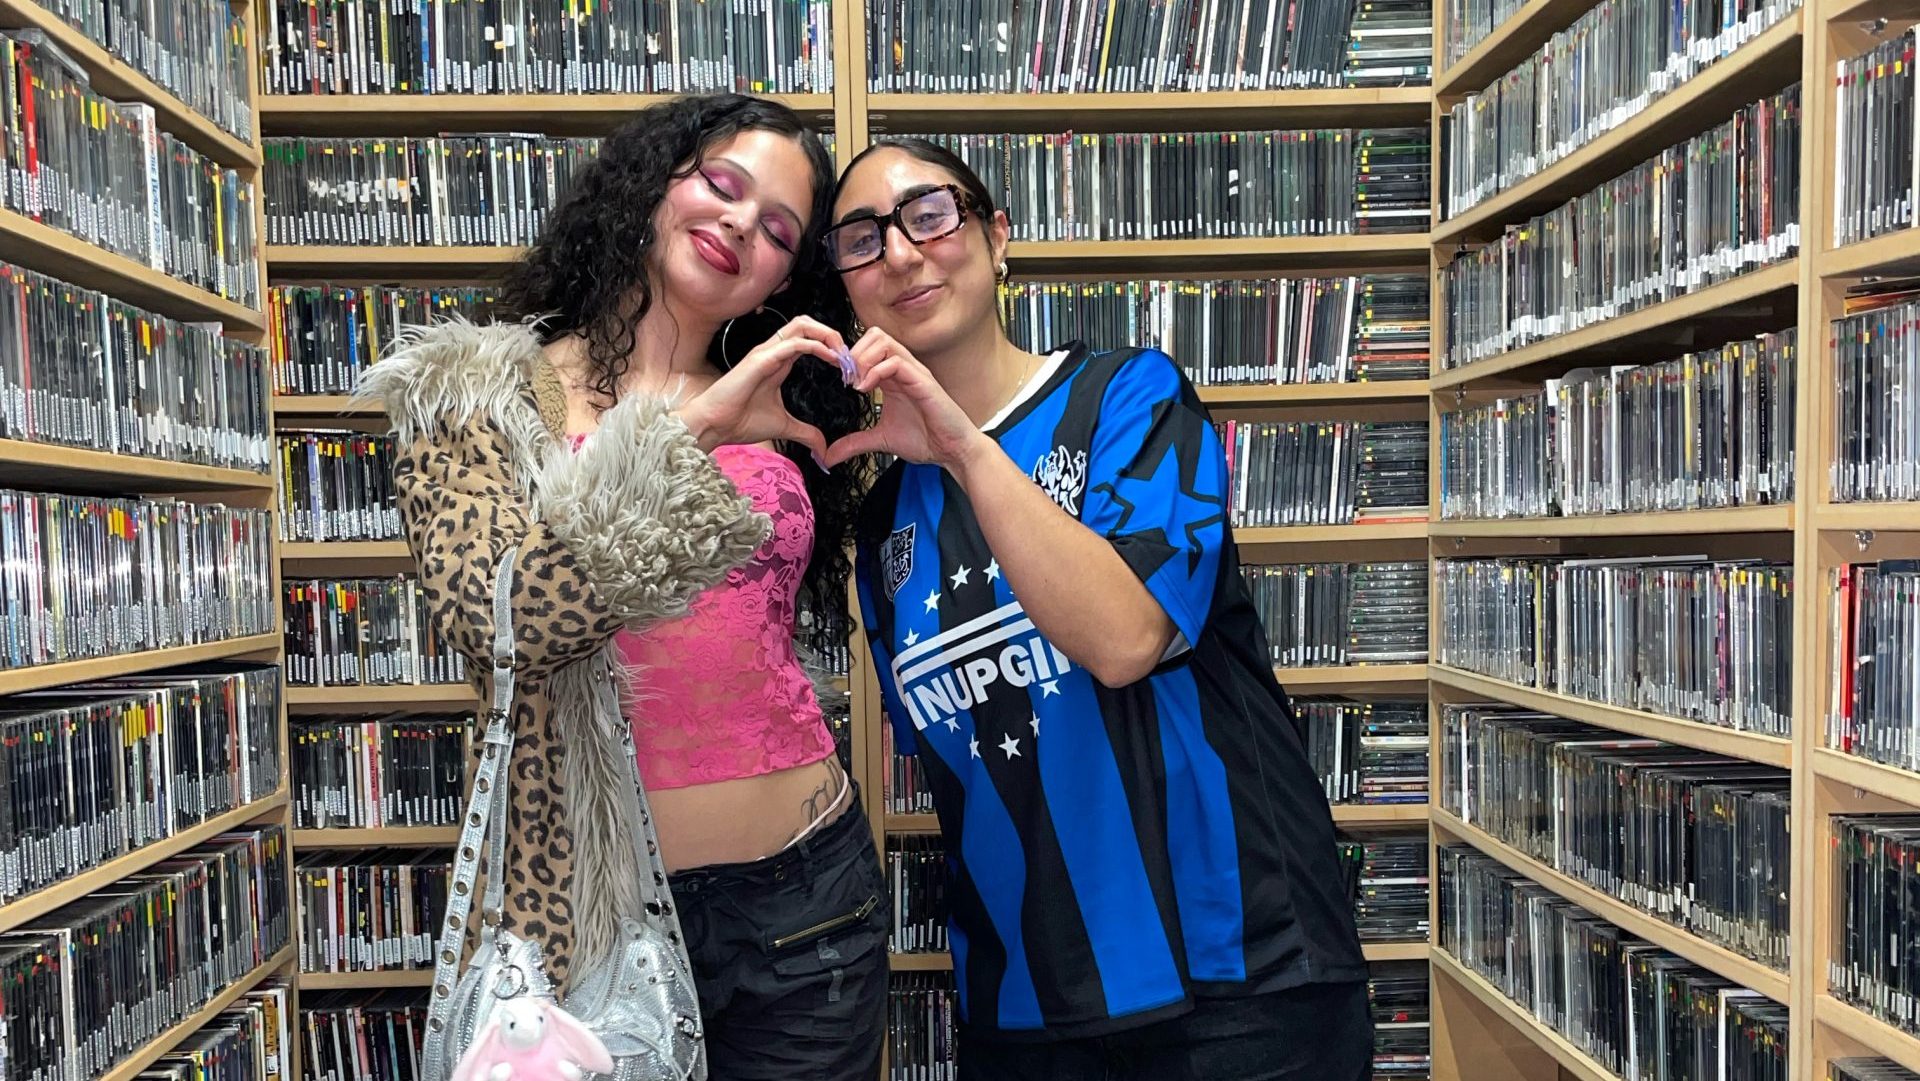 Naz and Cherry Chola stand in the music library. They are making a love heart shape with their hands.